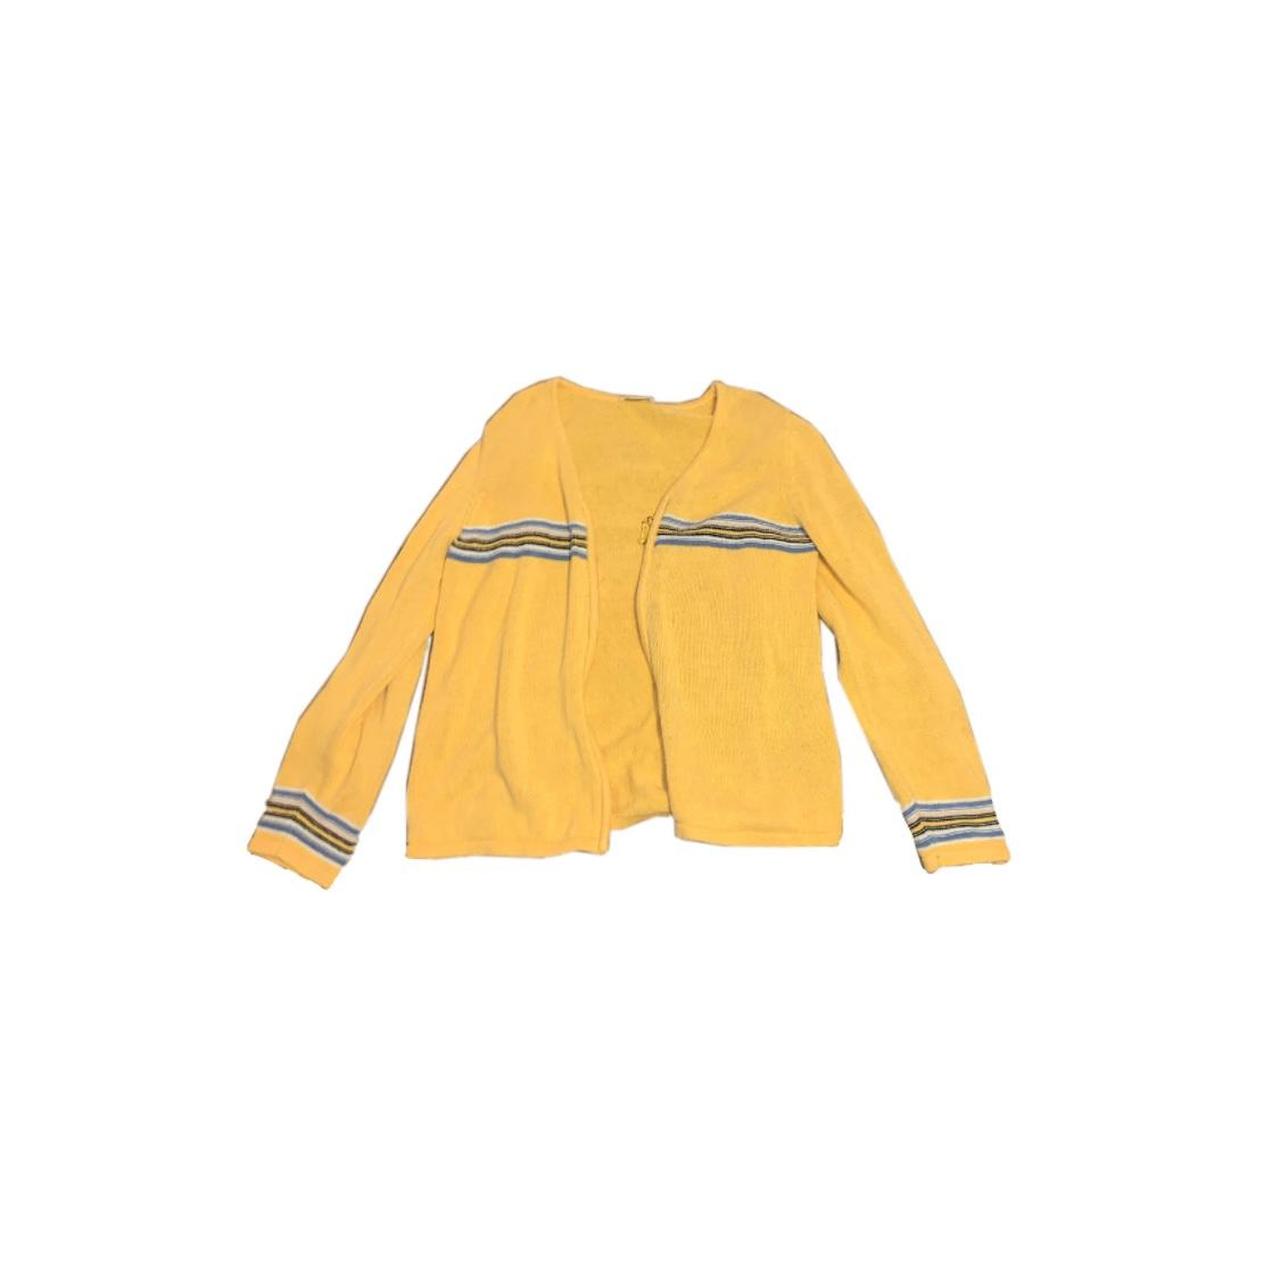 Crate Clothing Women's Yellow and Navy Jacket